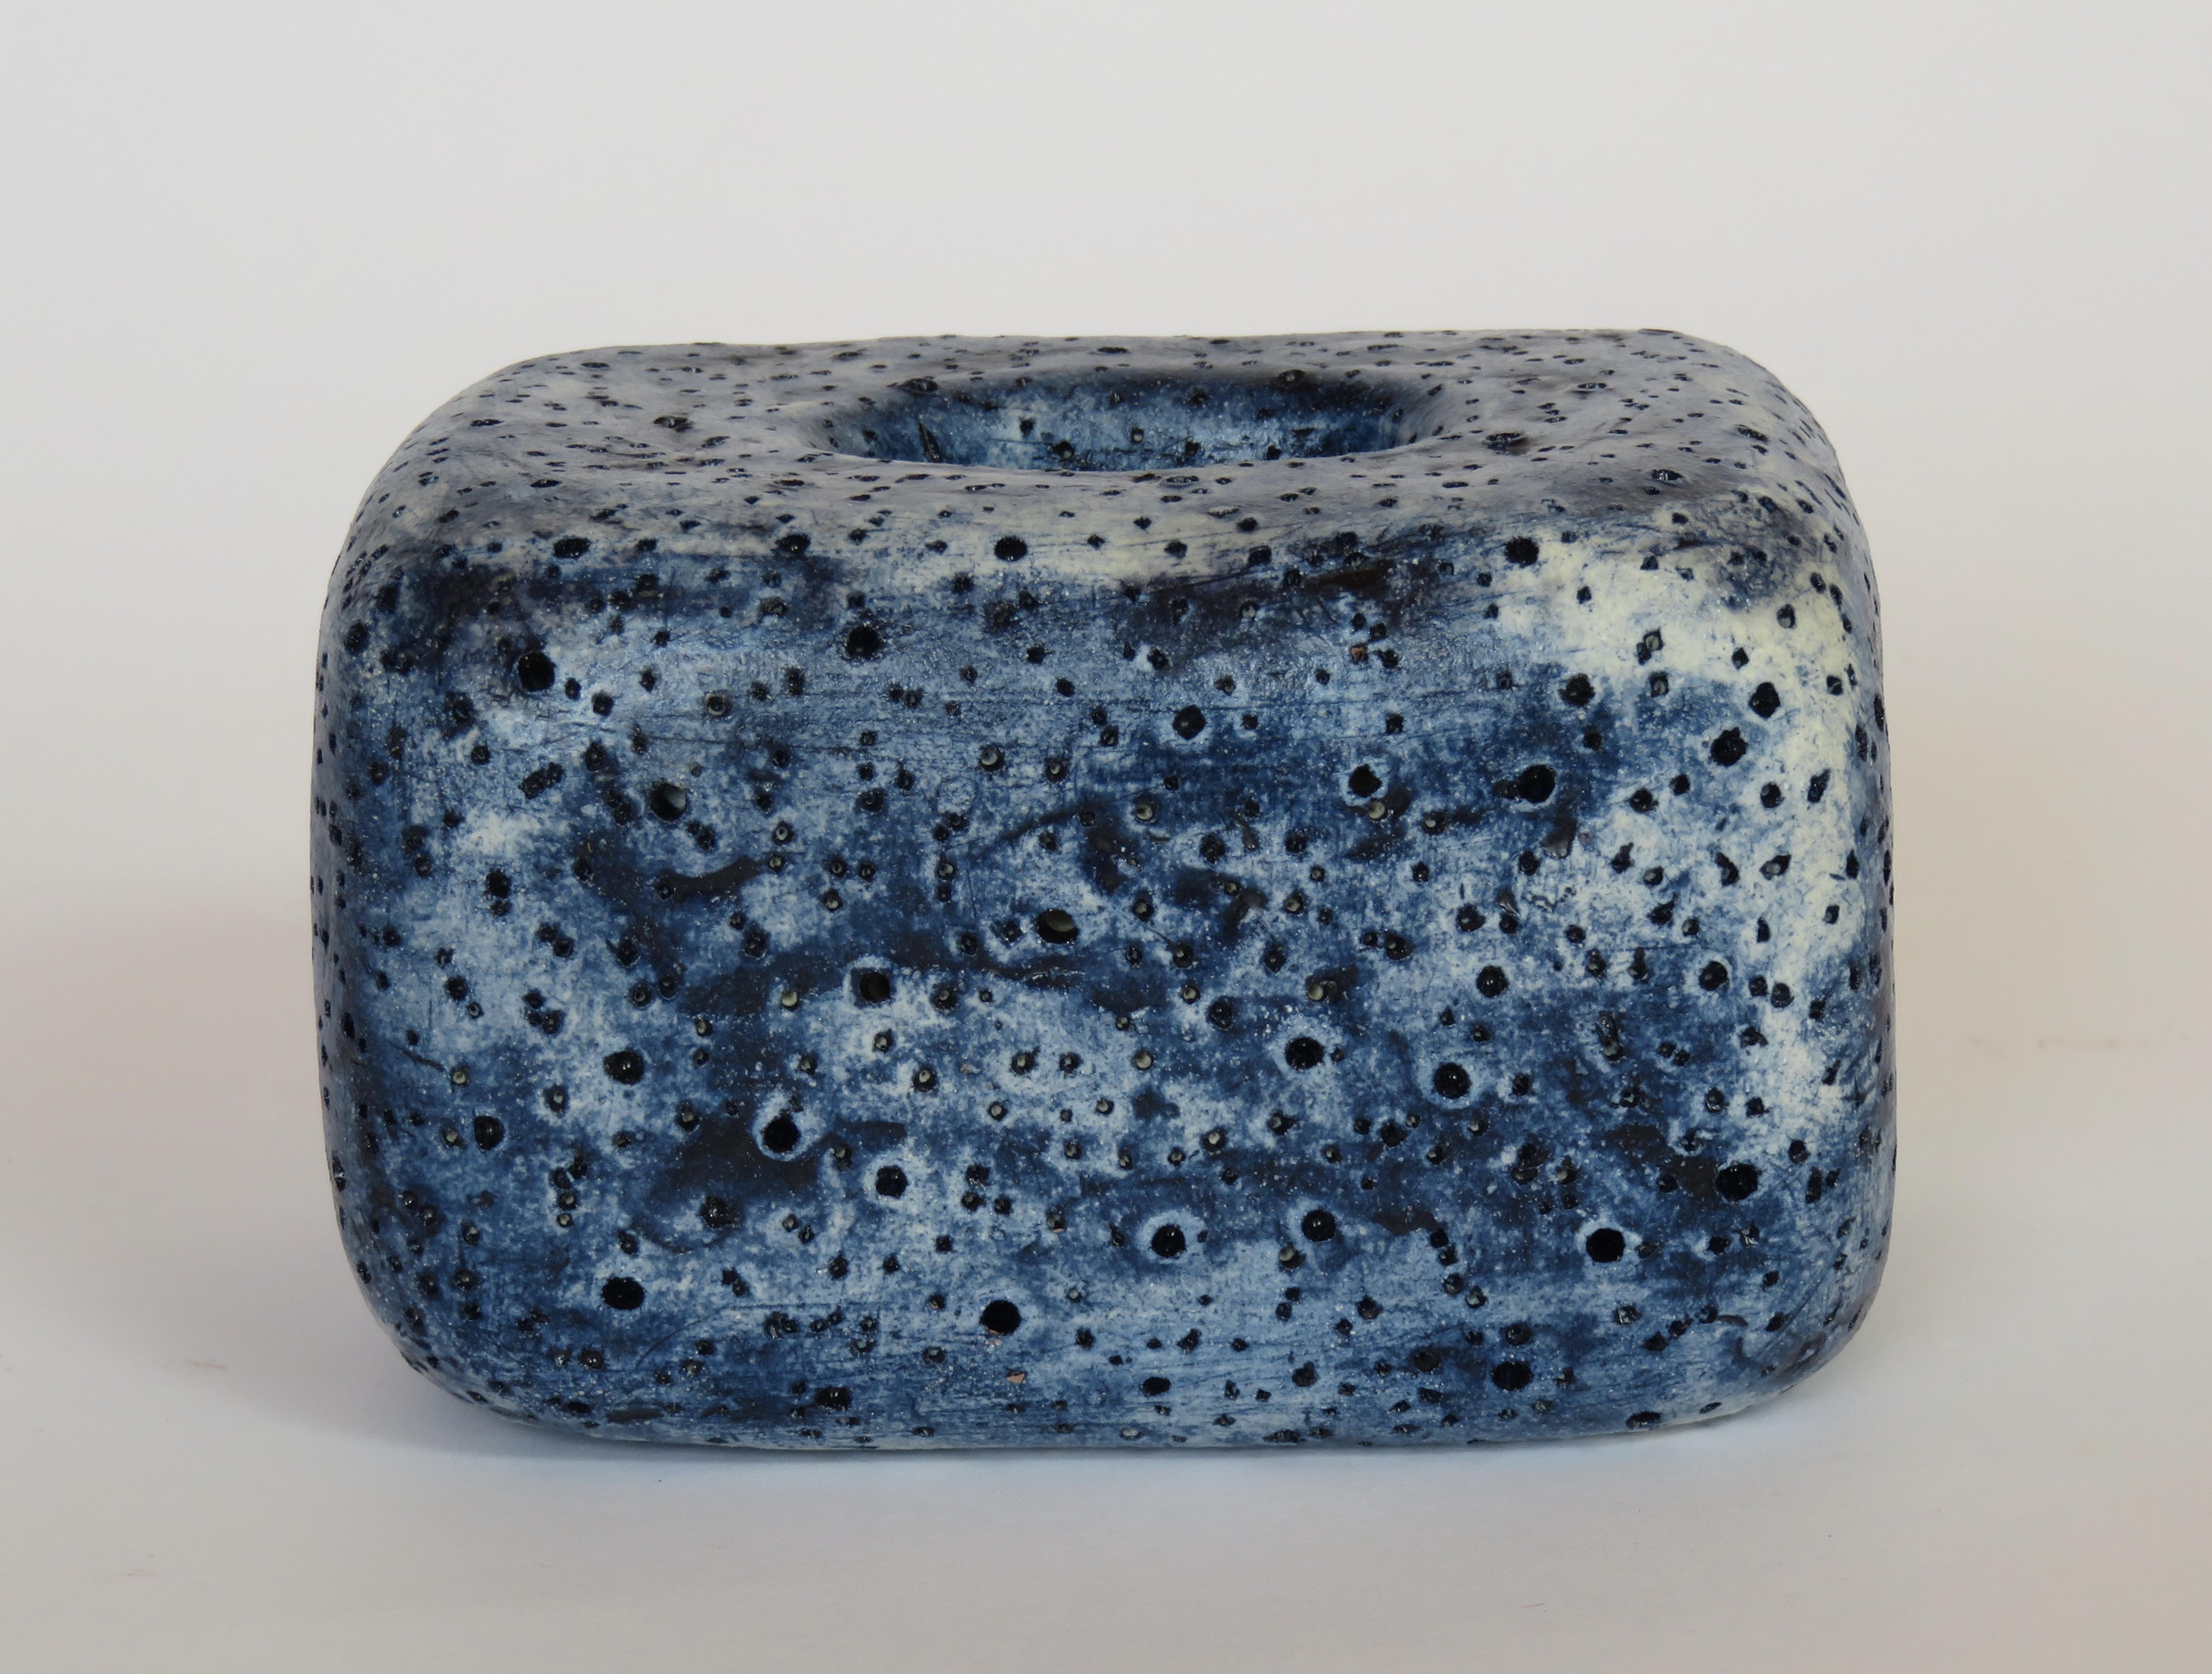 Hand Textured Ceramic Sculpture, Oblong Cube with Oval Opening in Deep Blue Wash 2